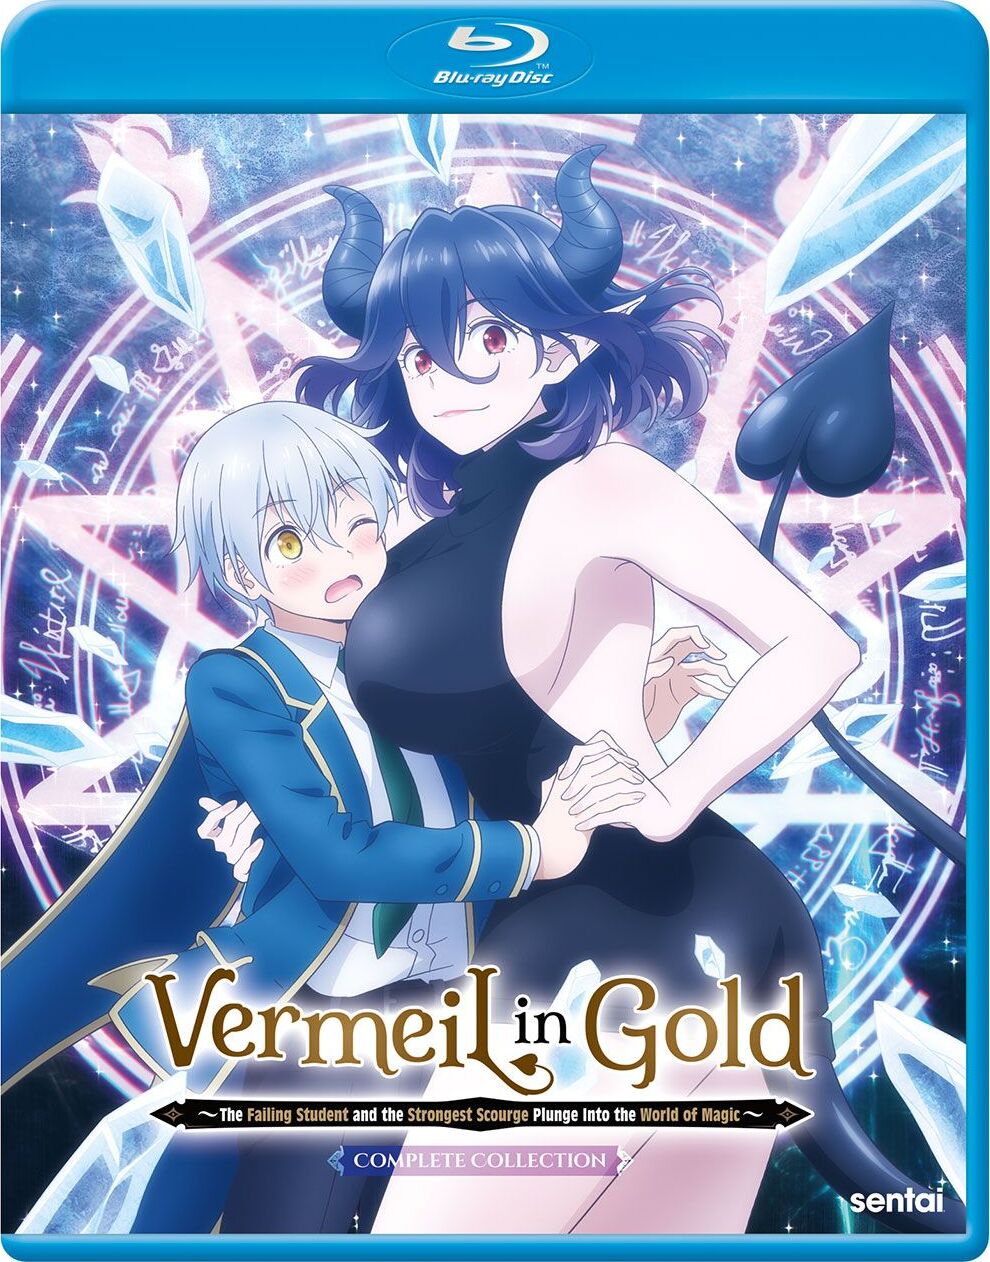 Ging-anime on X: Vermeil in Gold… had an underwhelming season